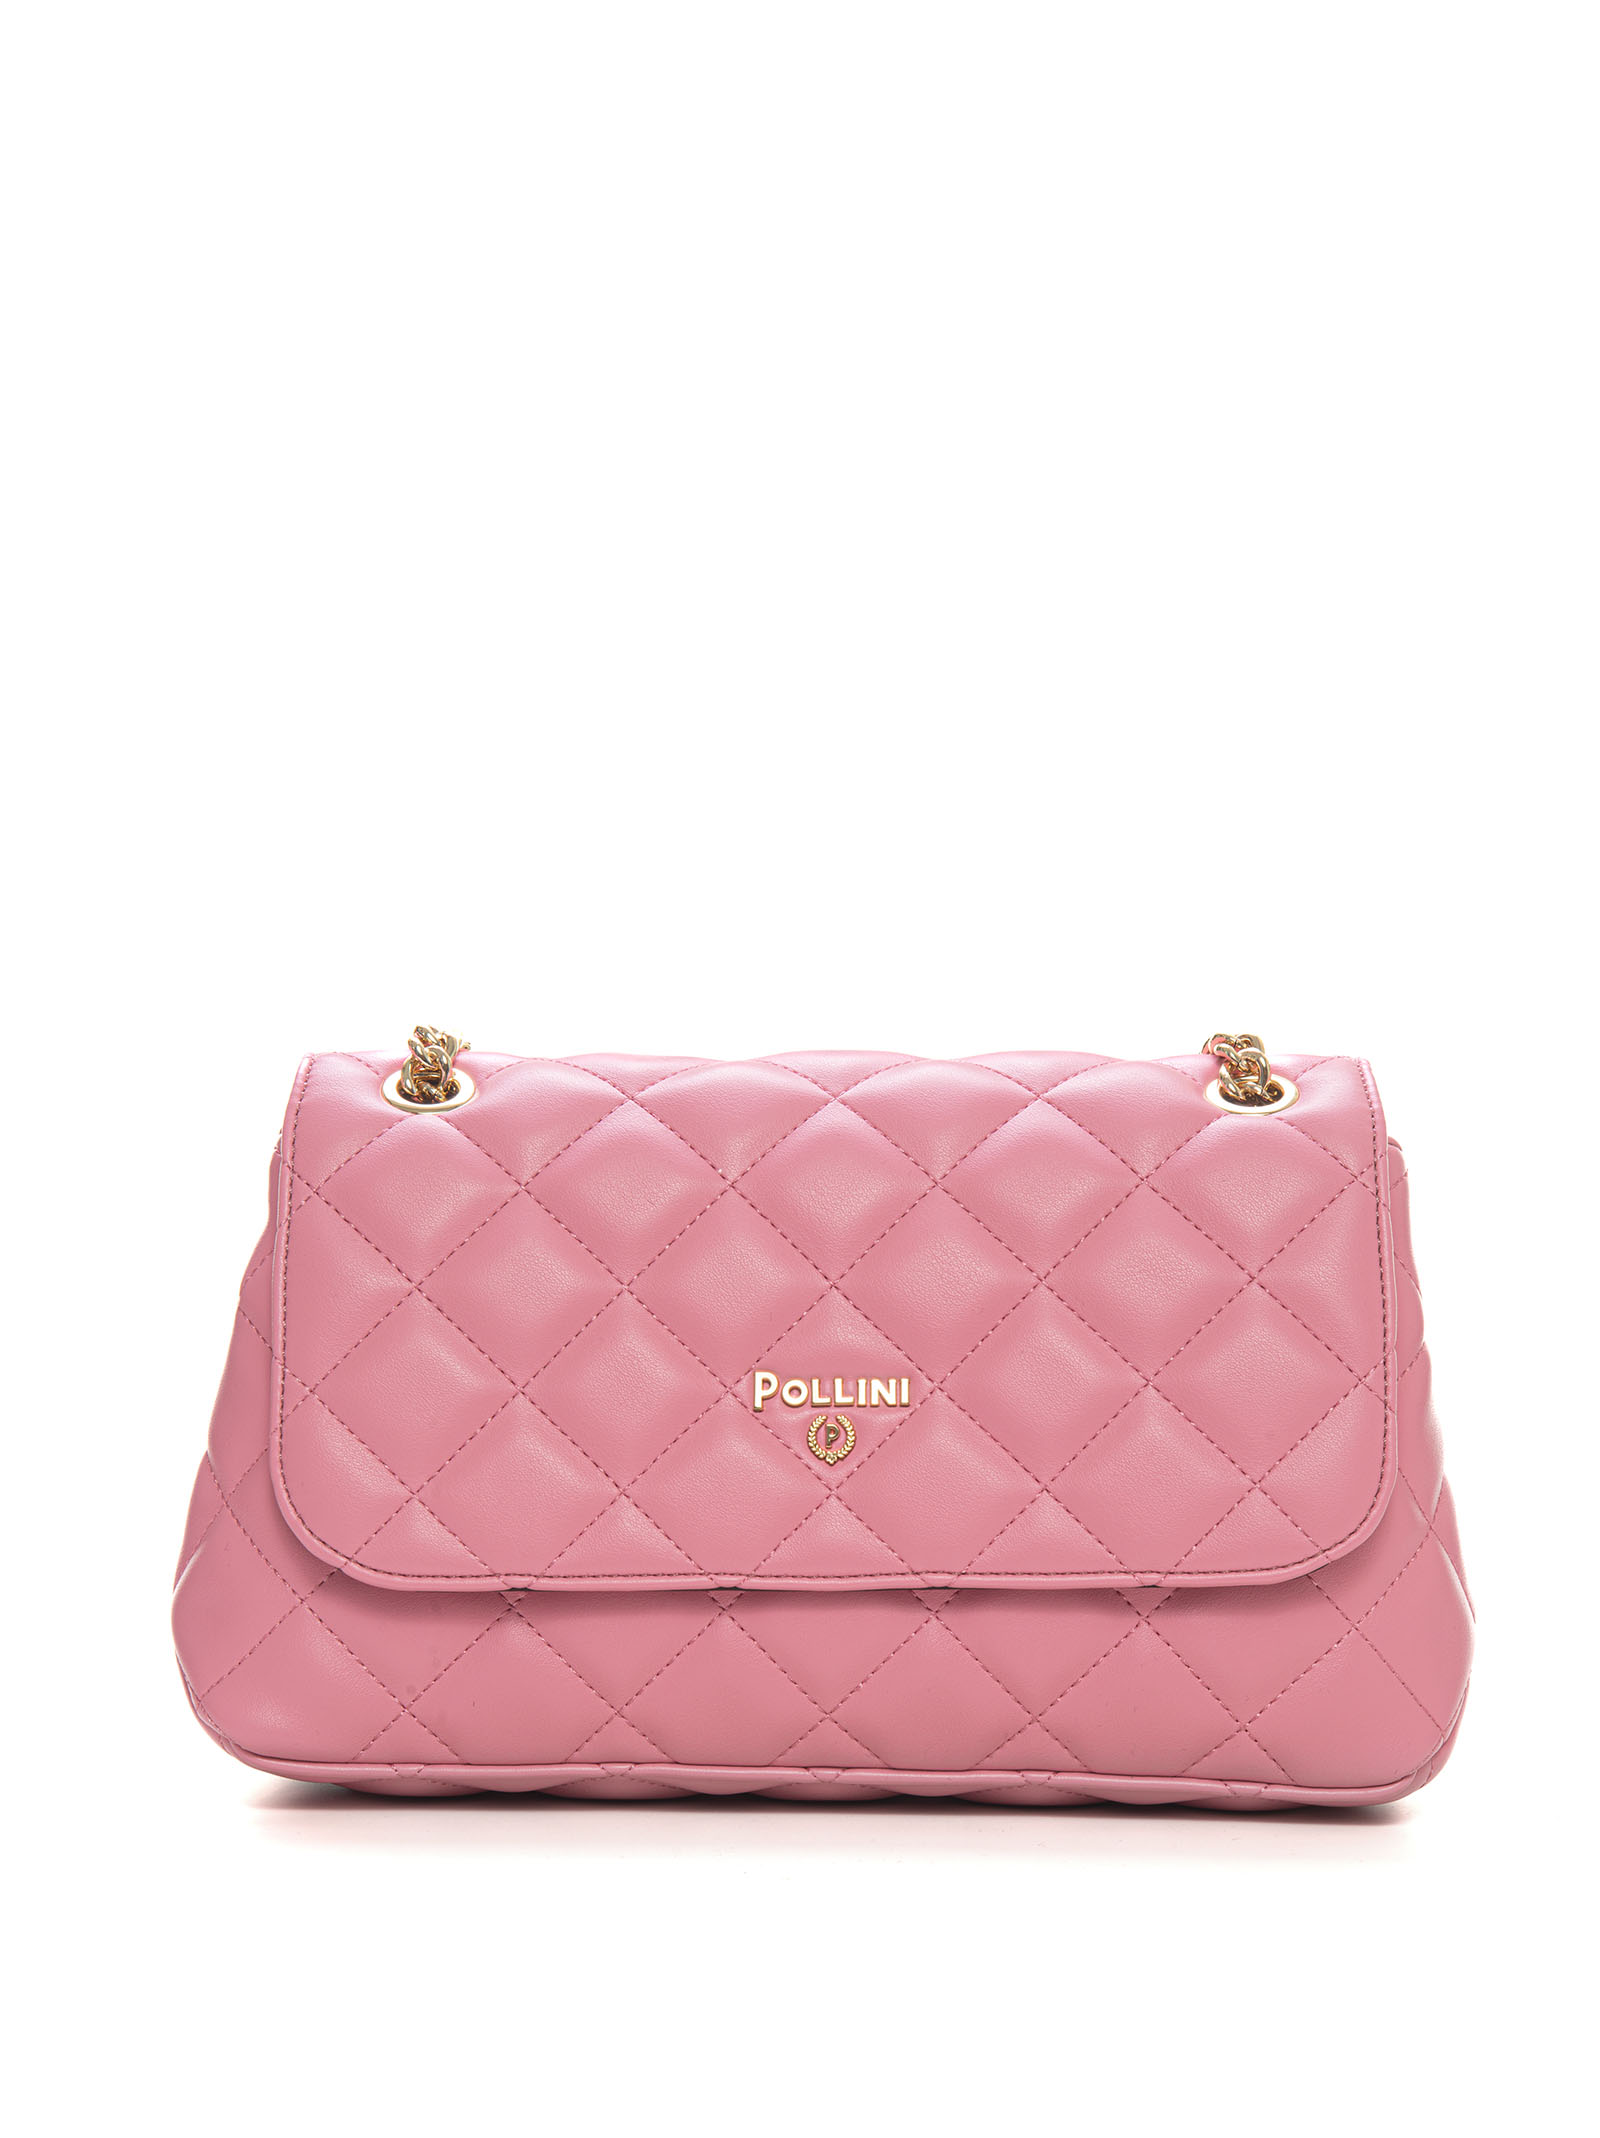 Pollini Grande Chanel Chanel Style Bag In Pink